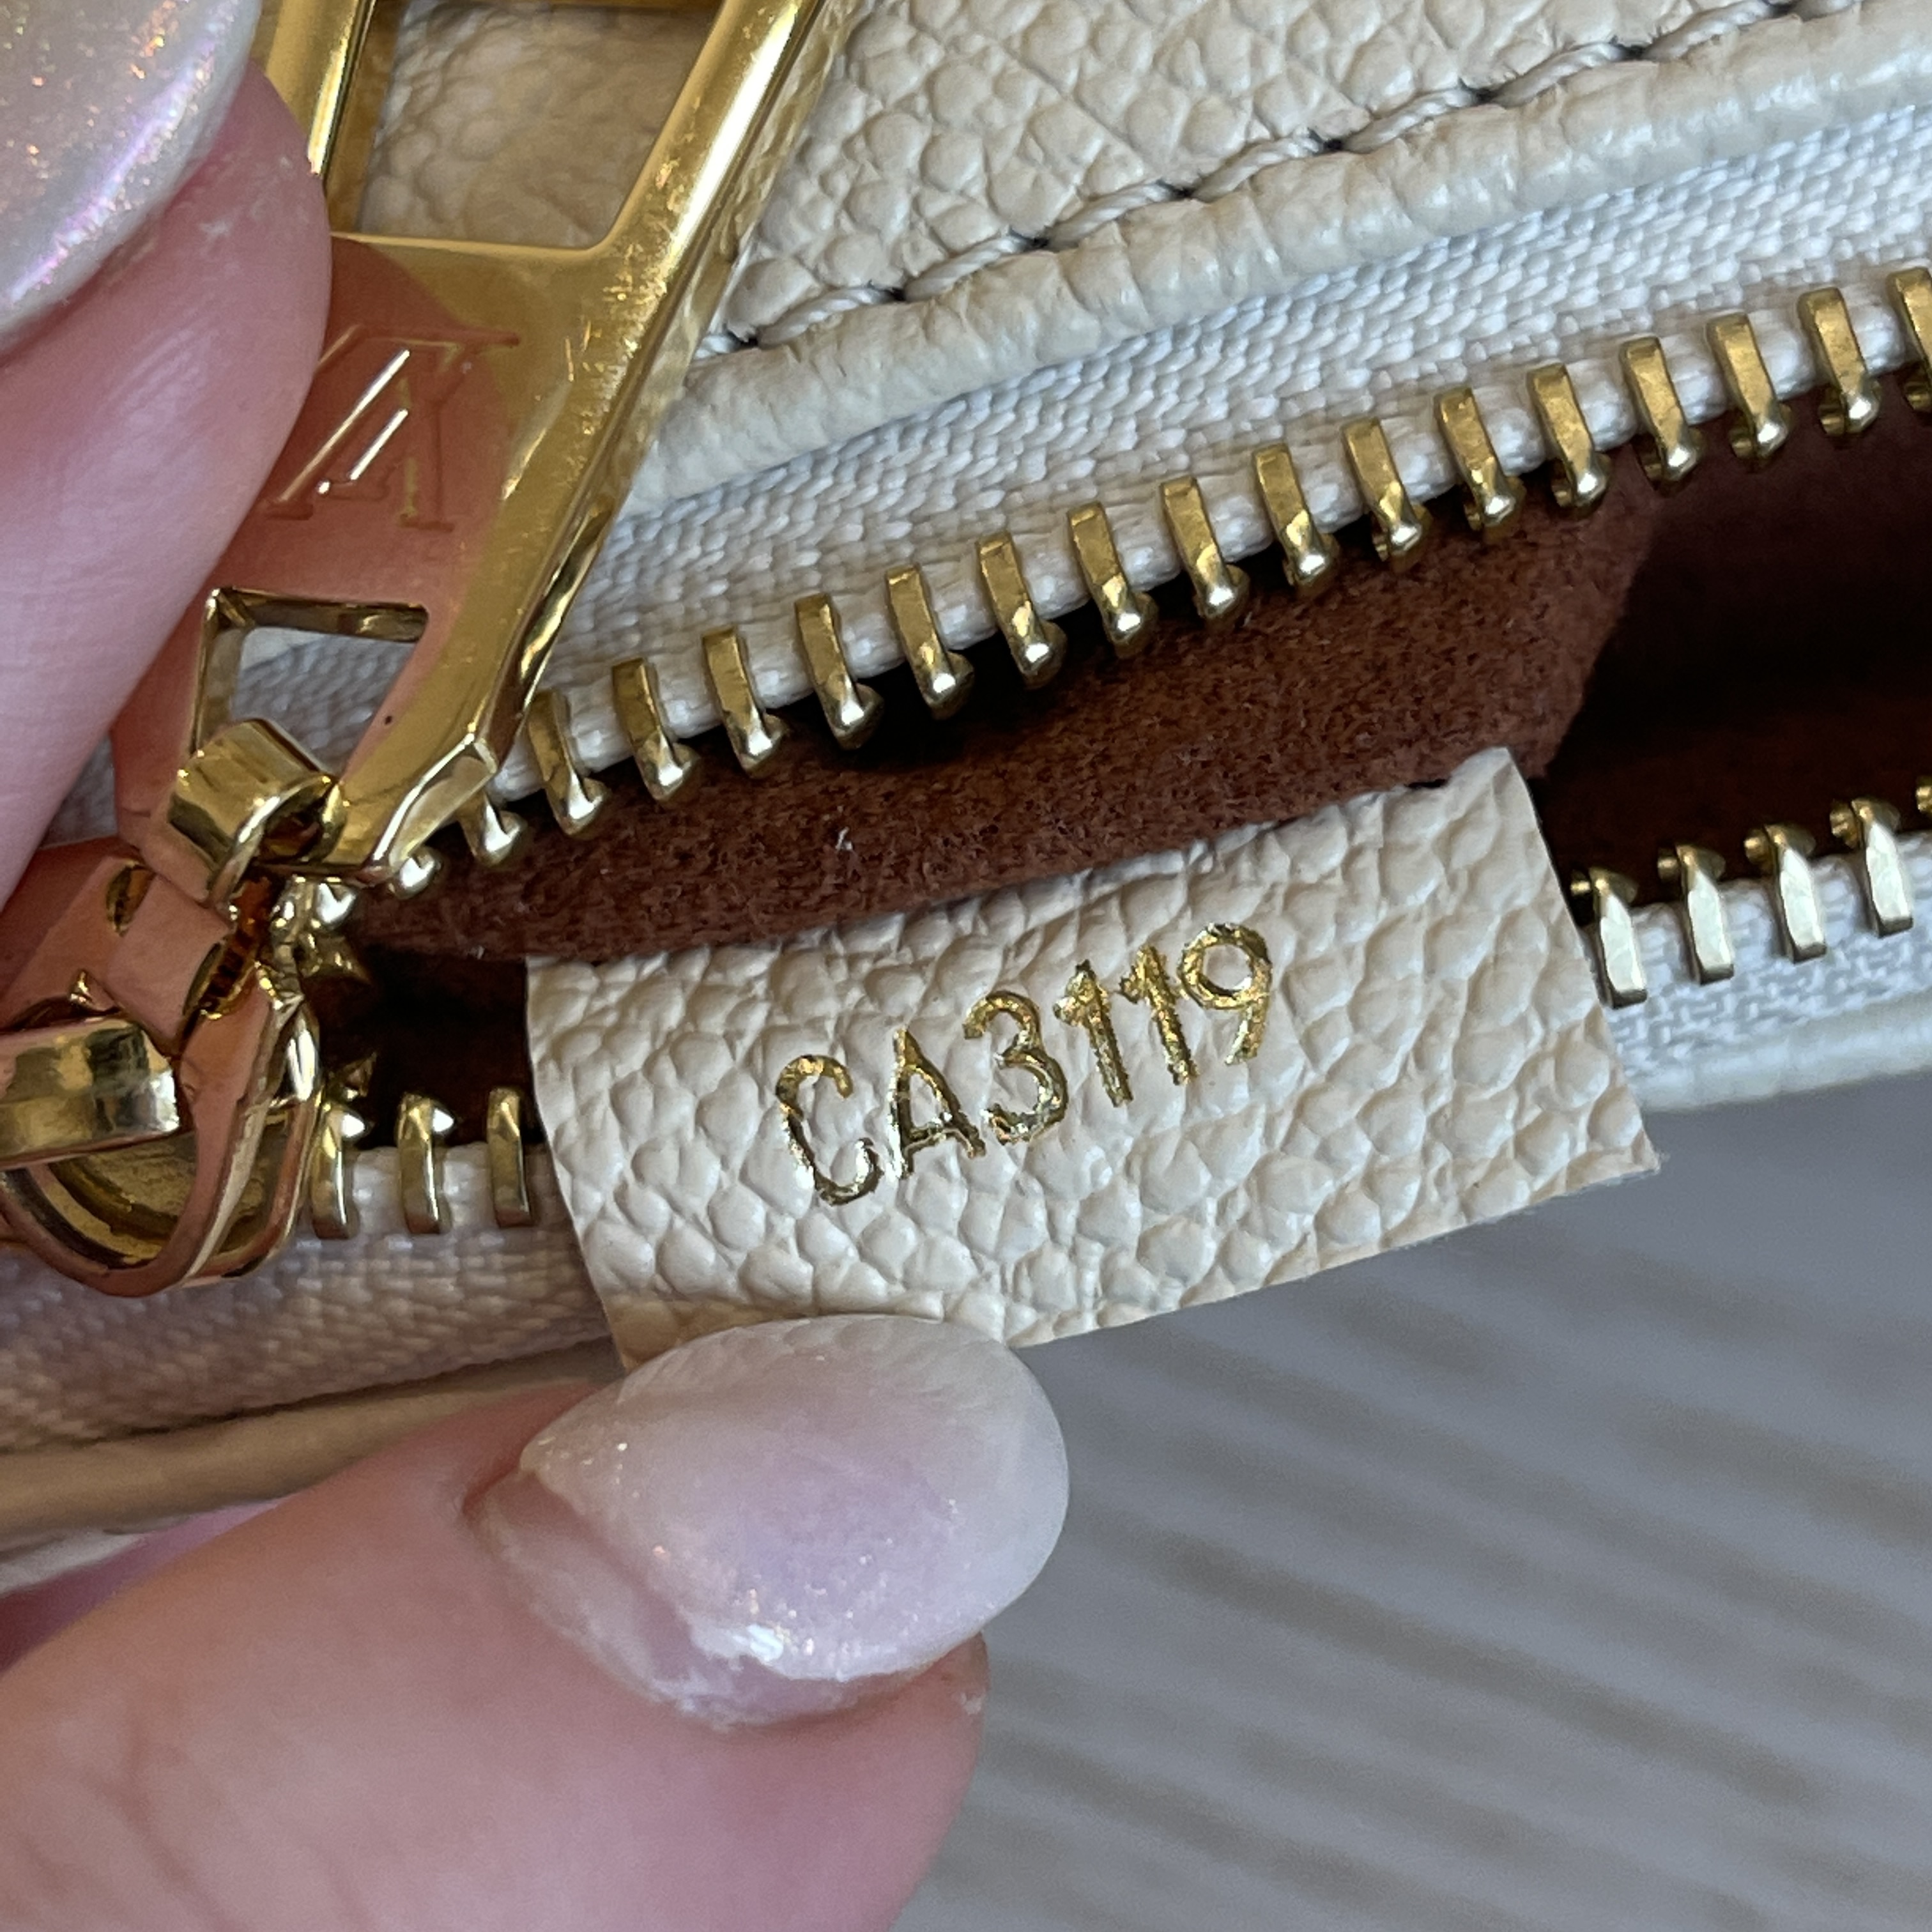 Monogram Empreinte Creme bumbag…Was this one quickly discontinued